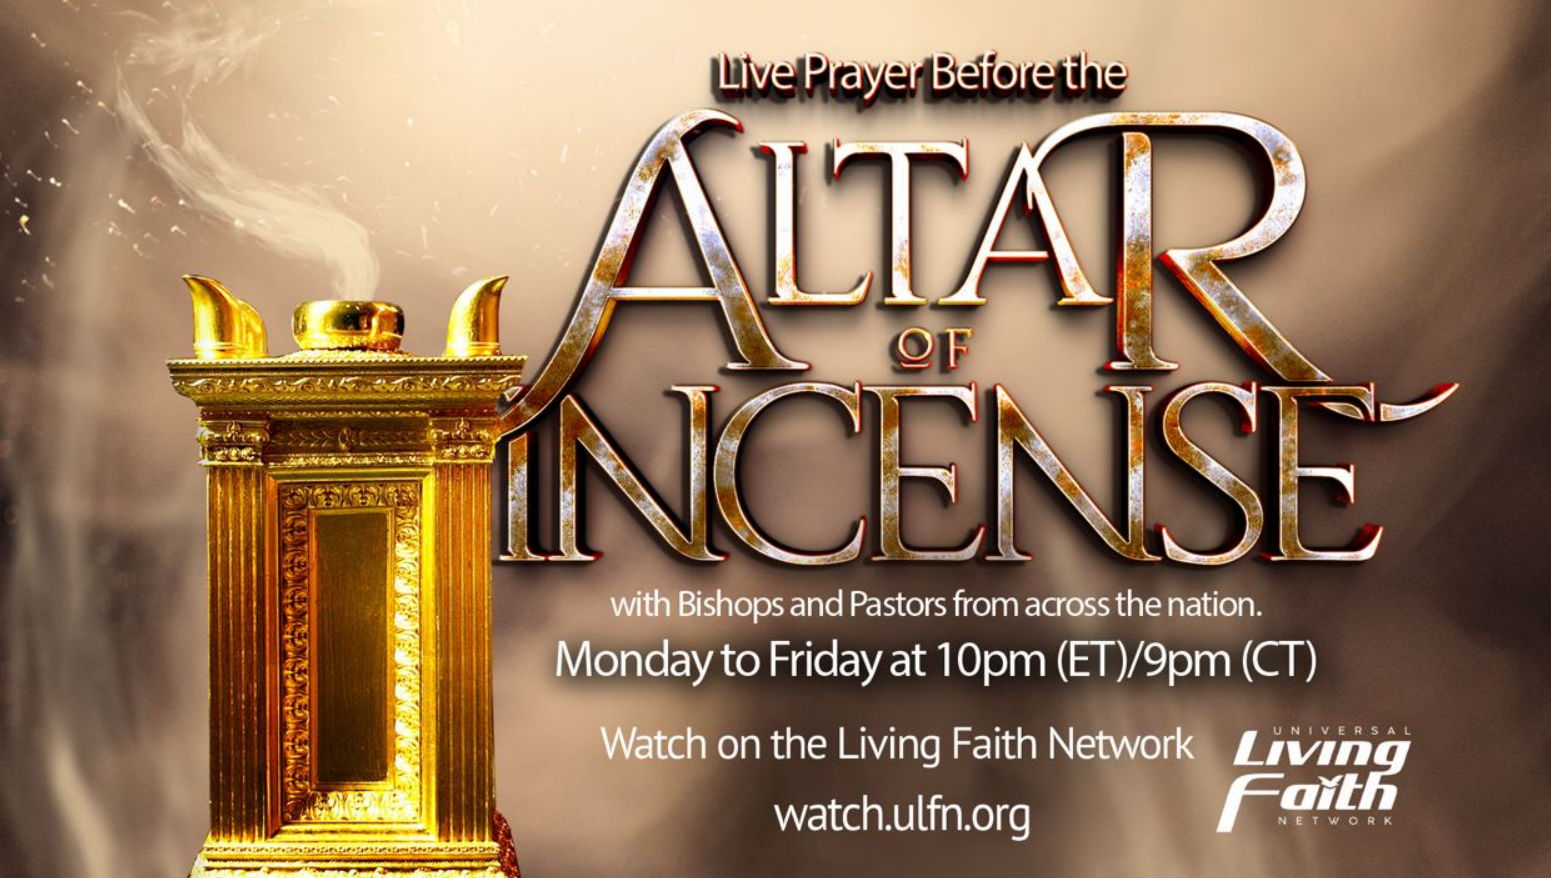 The Altar of Incense: The Wisdom That Comes From God2 min read